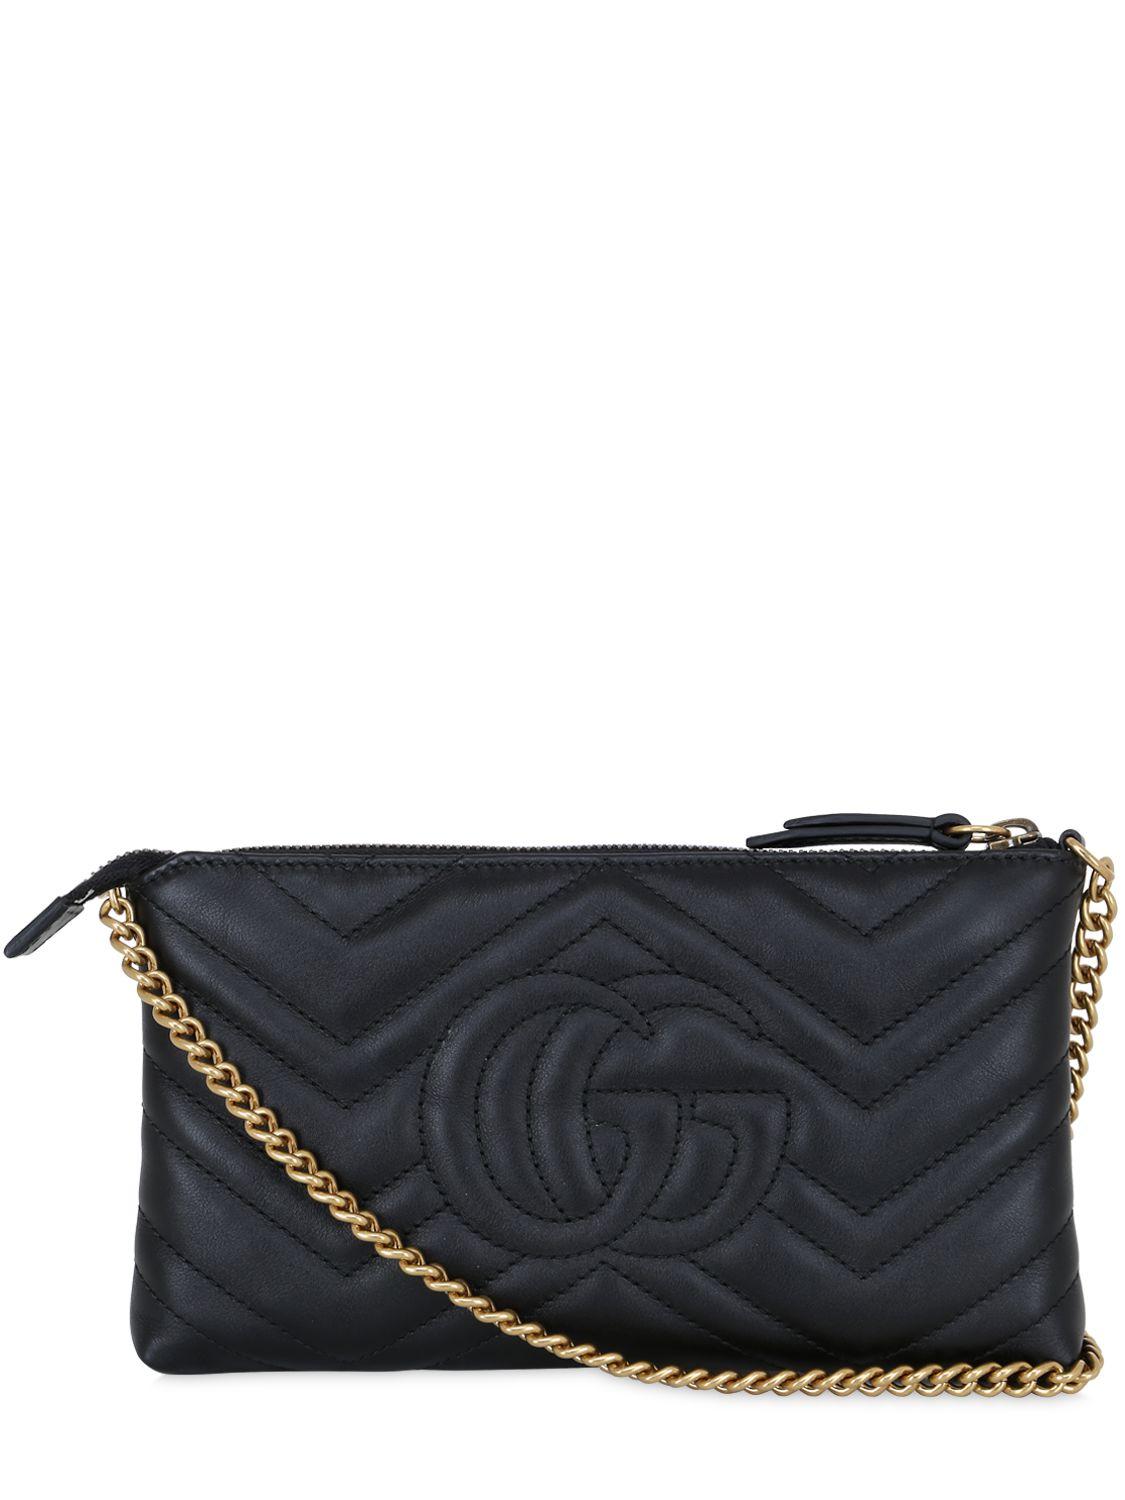 Lyst - Gucci Gg Marmont 2.0 Leather Clutch in Black